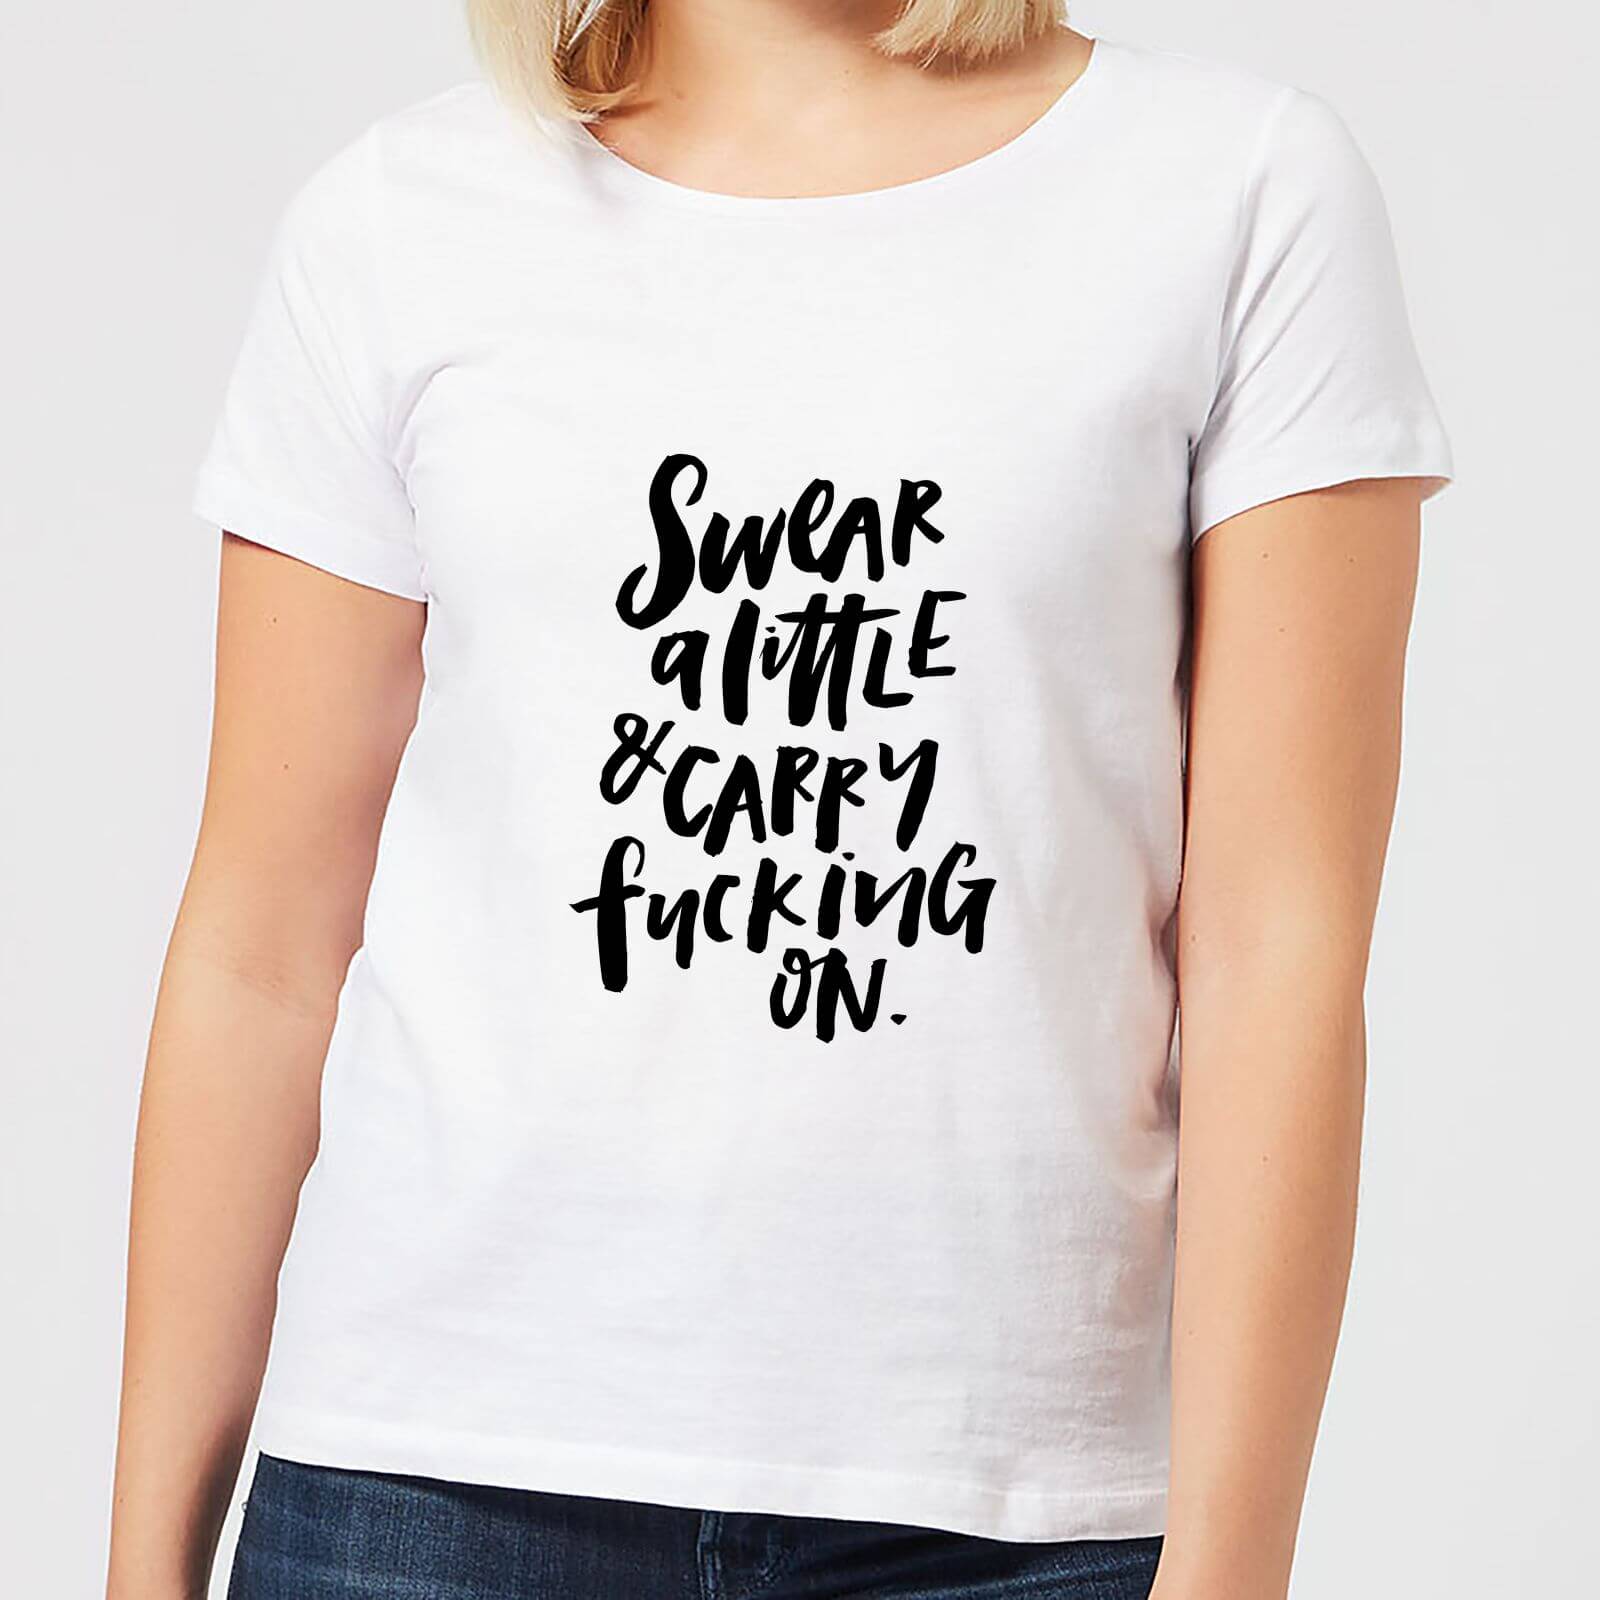 Swear A Little and Carry Fucking On Women's T-Shirt - White - S - White